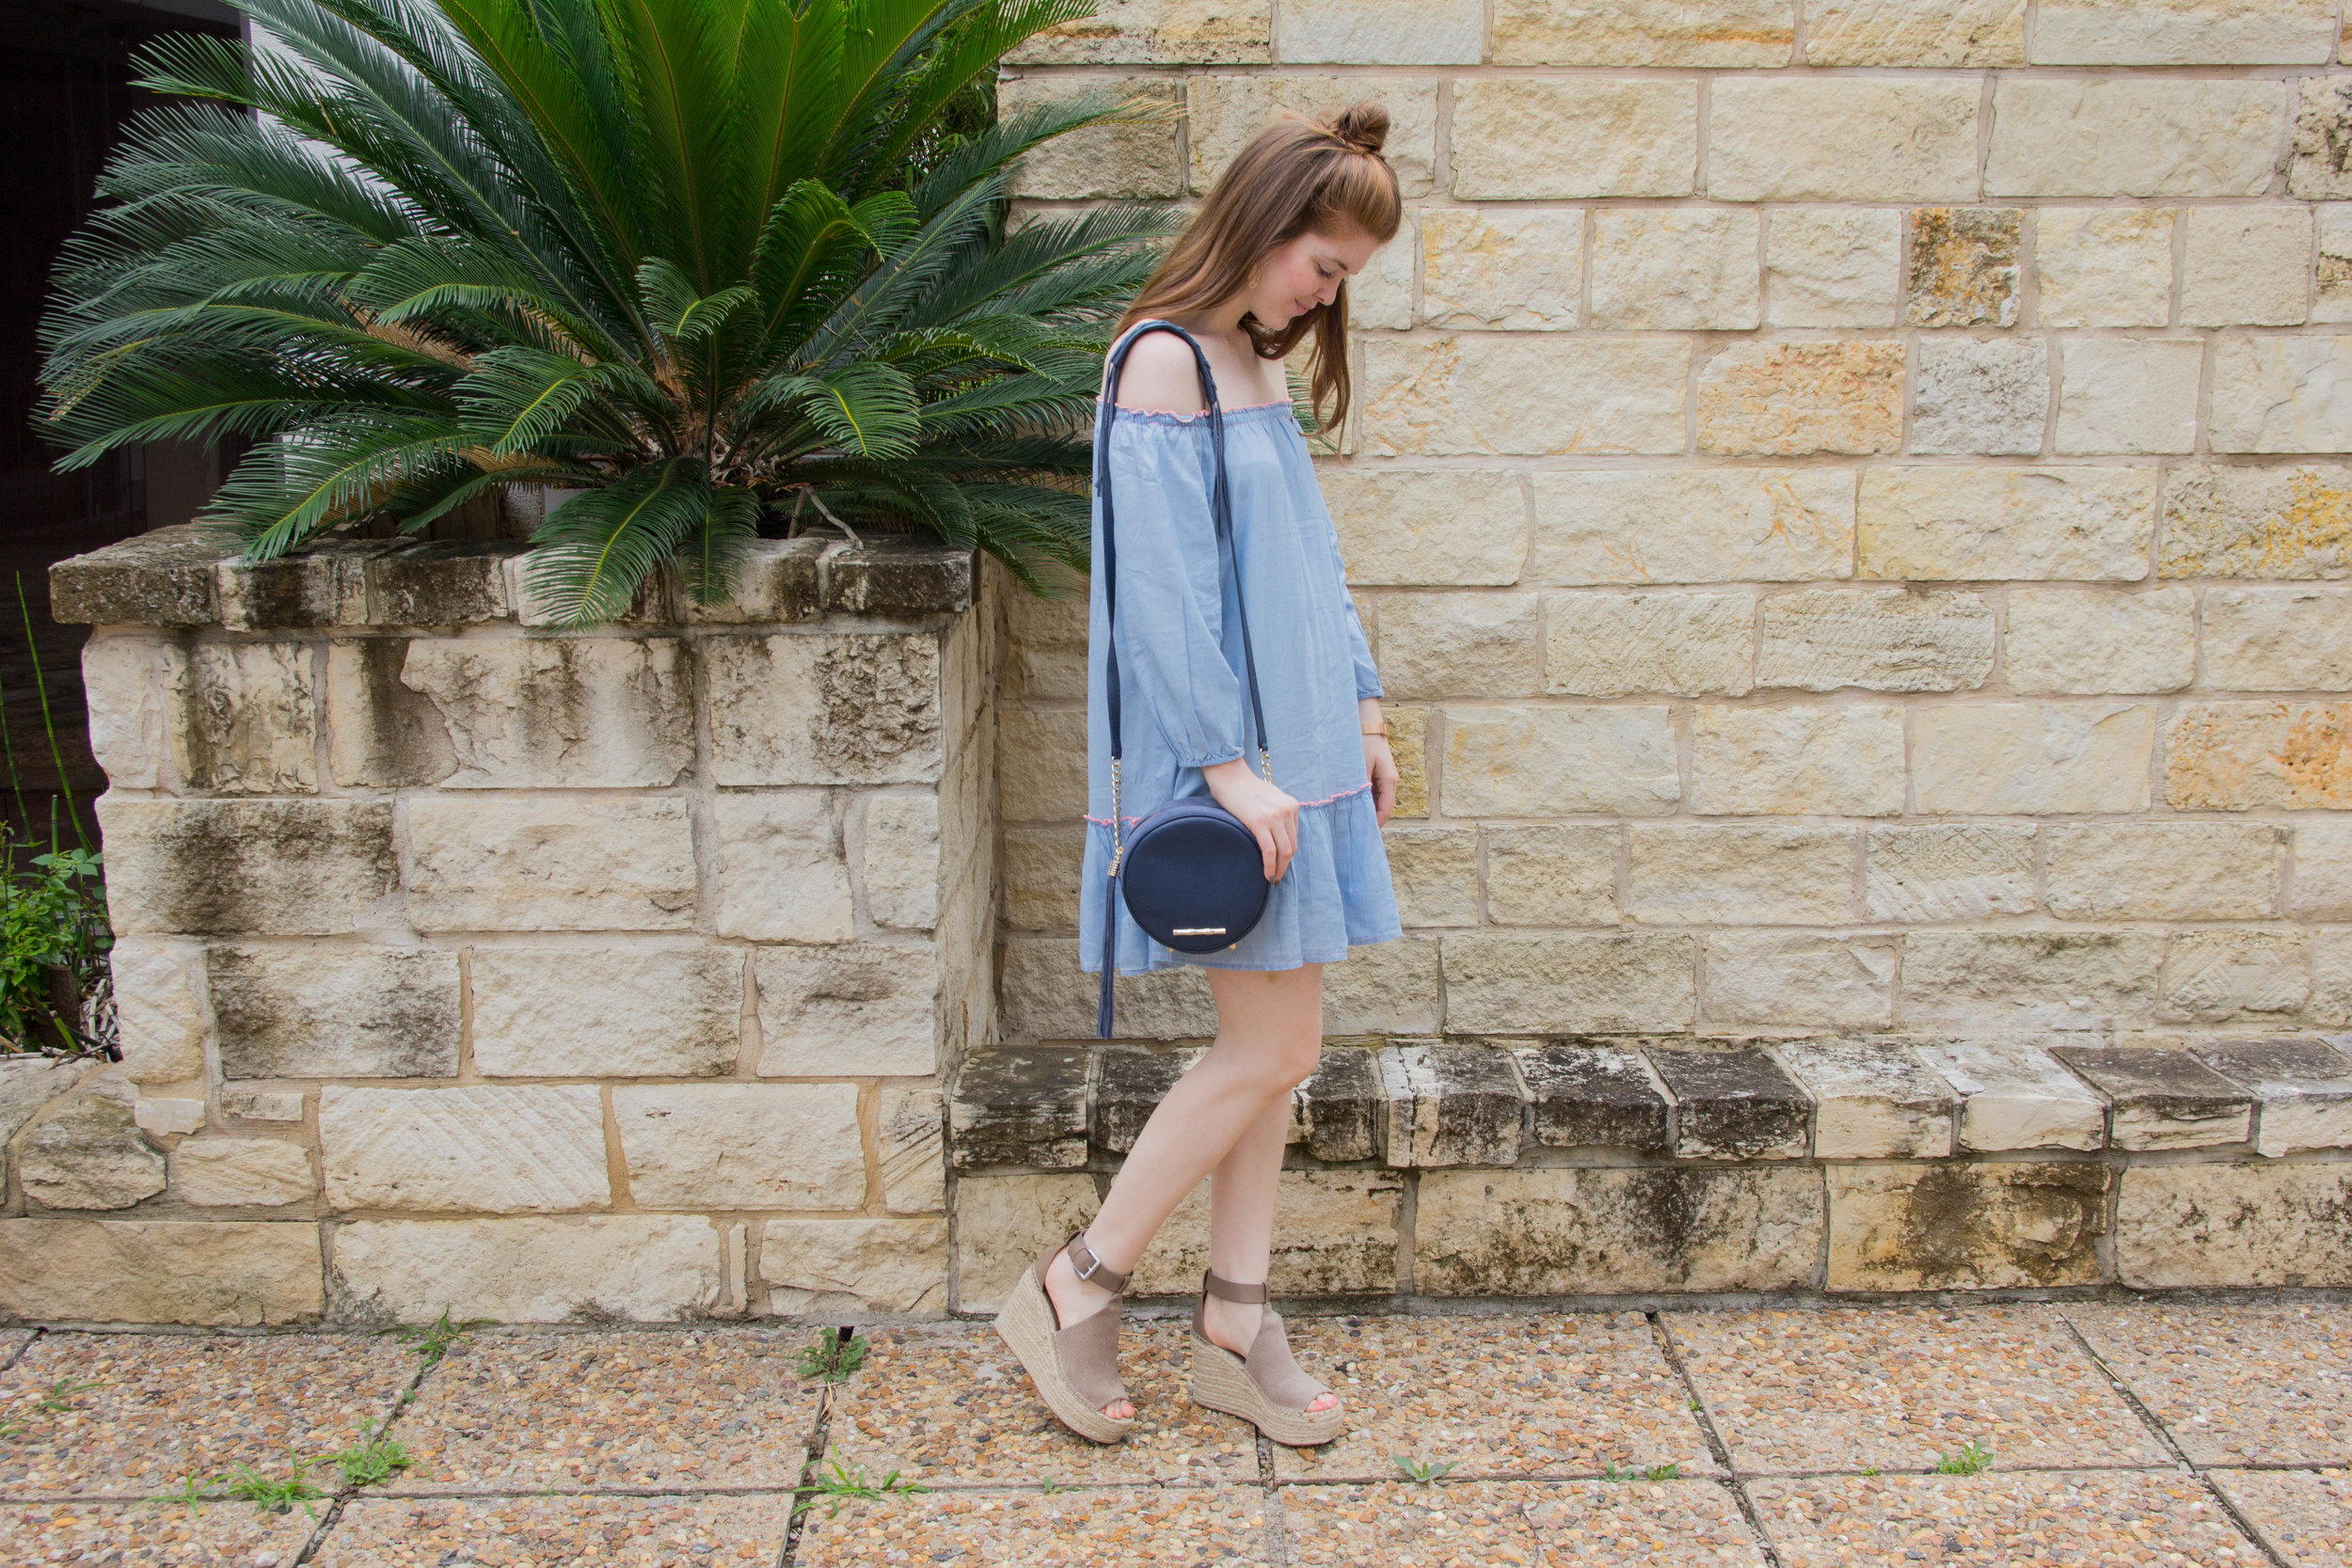 aerie chambray peasant dress, marc fisher annie wedges, daniel wellington classic petite rose gold watch, kendra scott layal earrings, elaine turner shelly bag, round purse, circle purse, transitional circle bag, lments of style, dallas fashion blog…